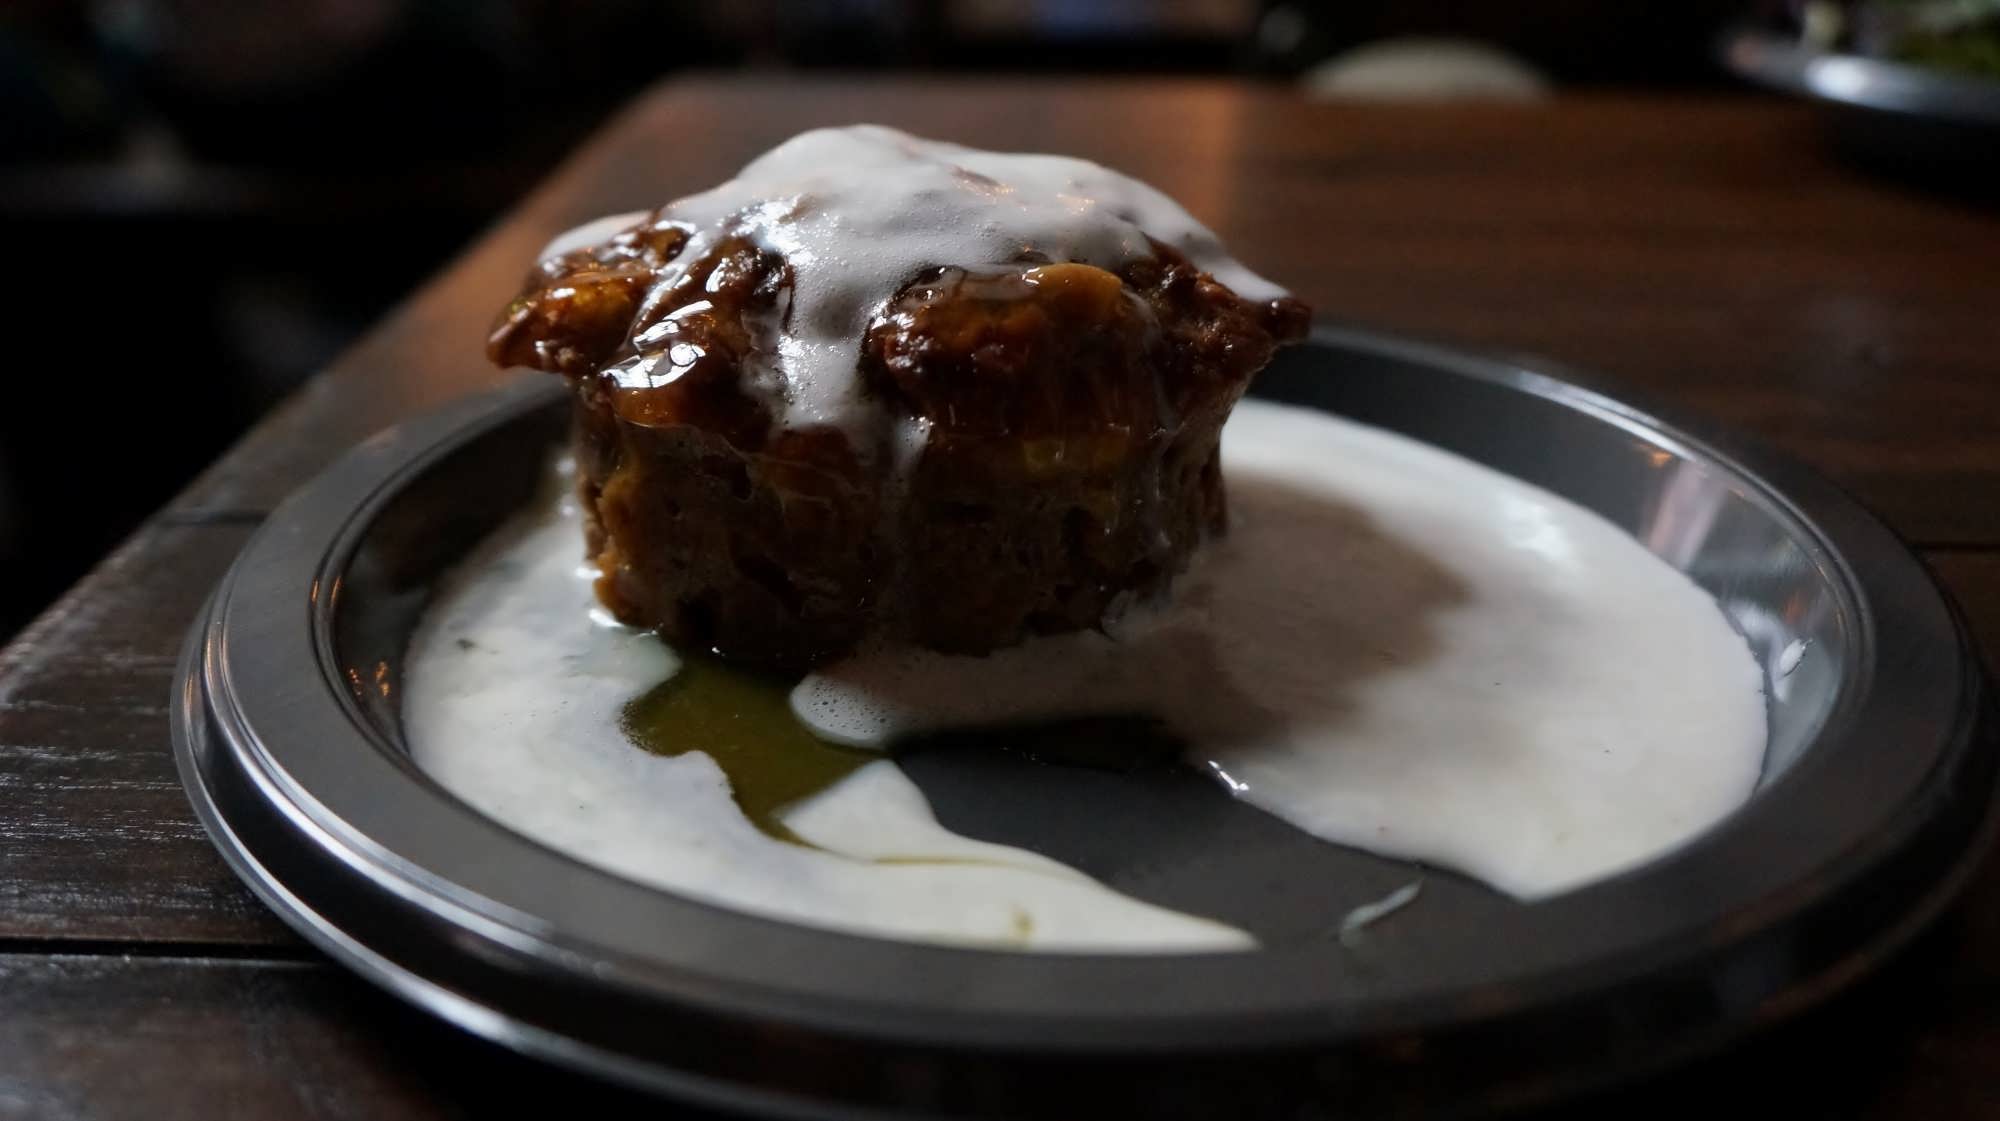  Sticky Toffee Pudding at the Leaky Cauldron